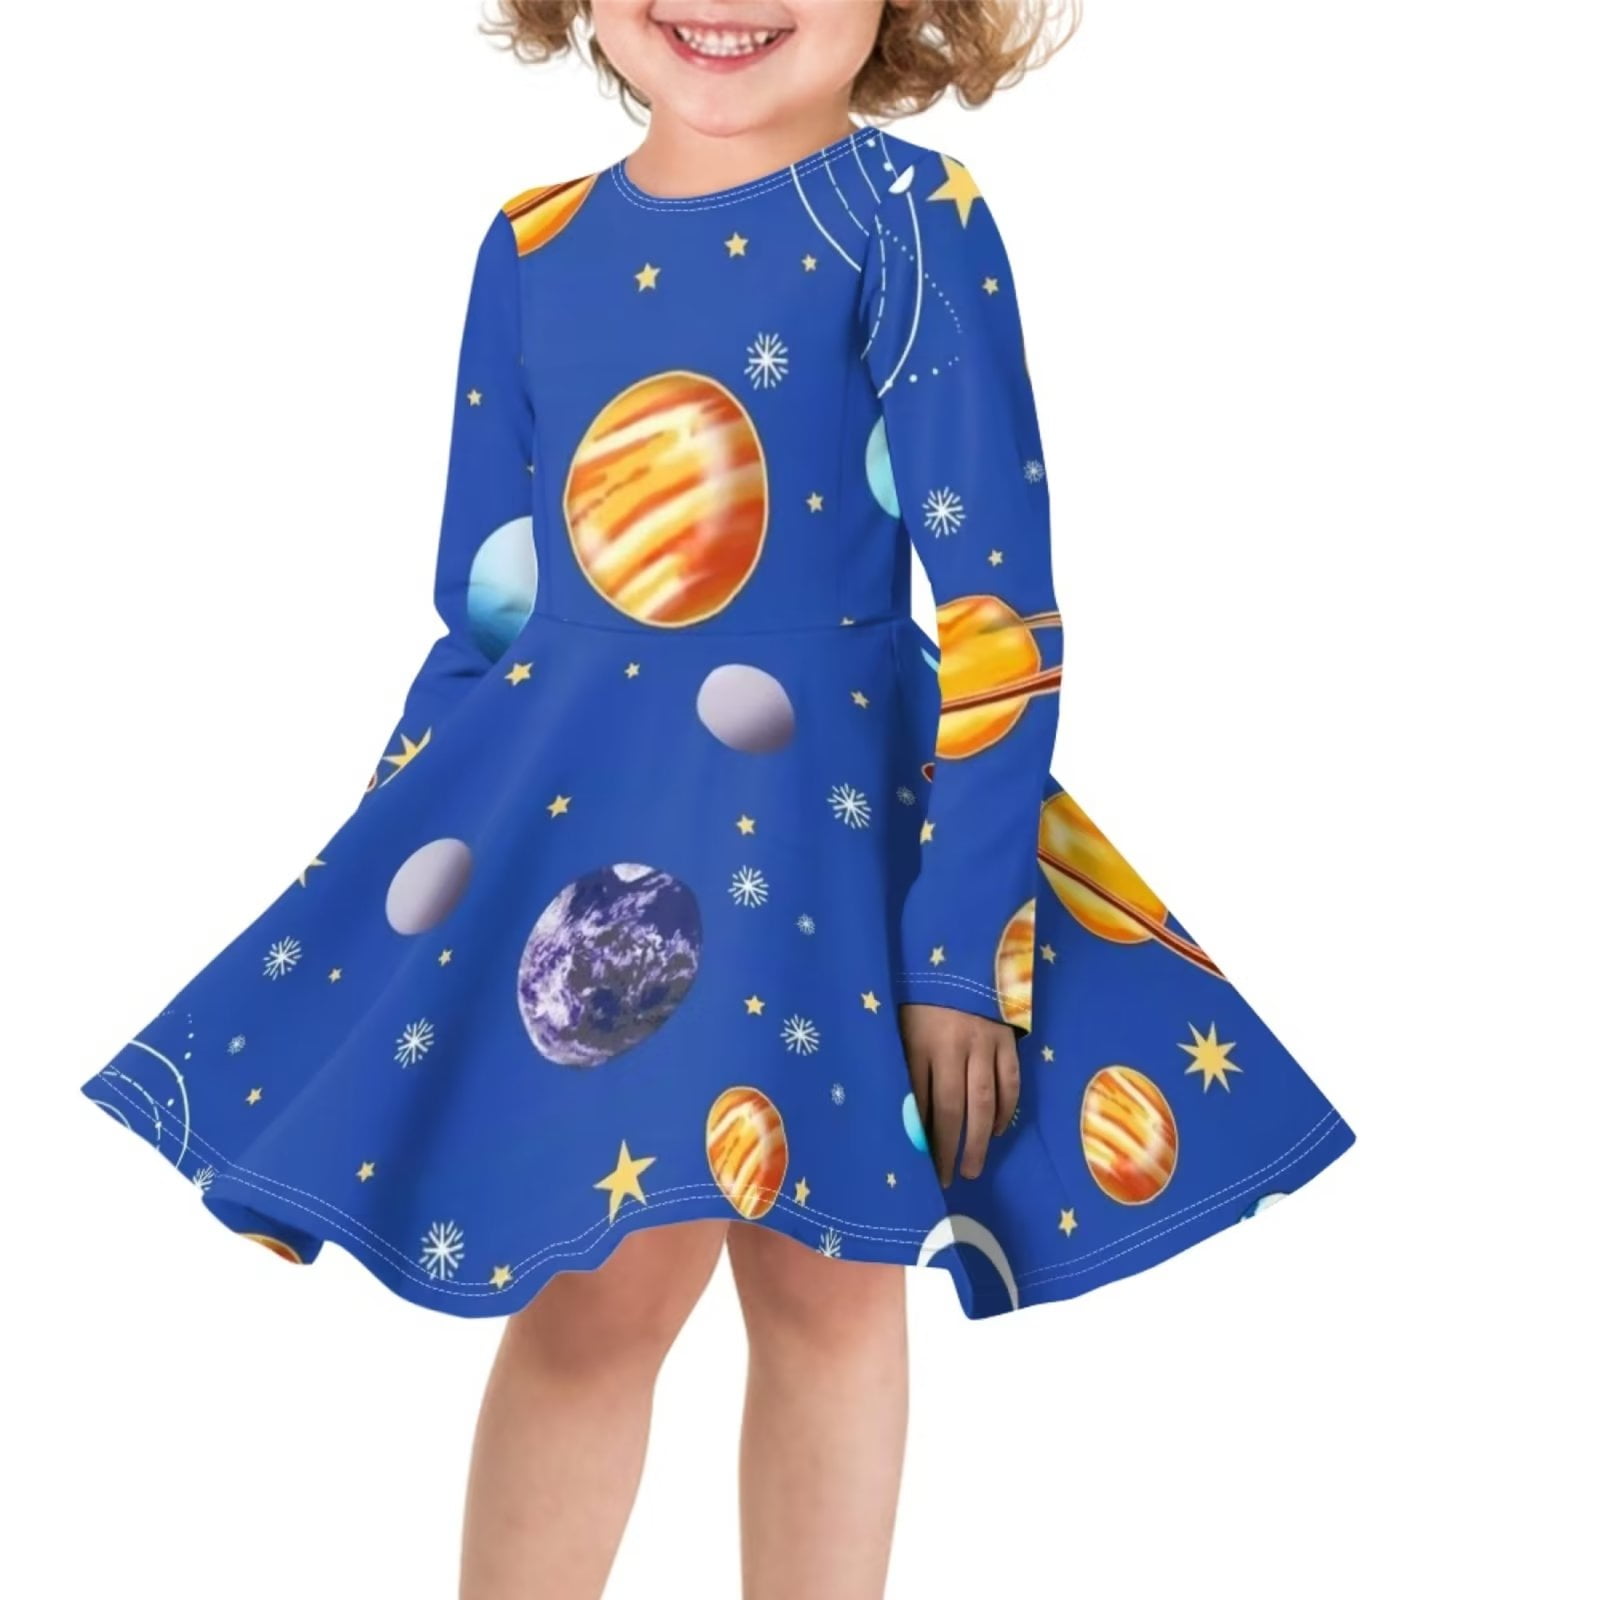 Suhoaziia Blue Winter Dresses for Elastic Playwear Round with Print Dress and Jumpskirt Girls A-Line Years Sleeves Neck Preppy 11-12 Cosmic Size Winter School Stars Toddler